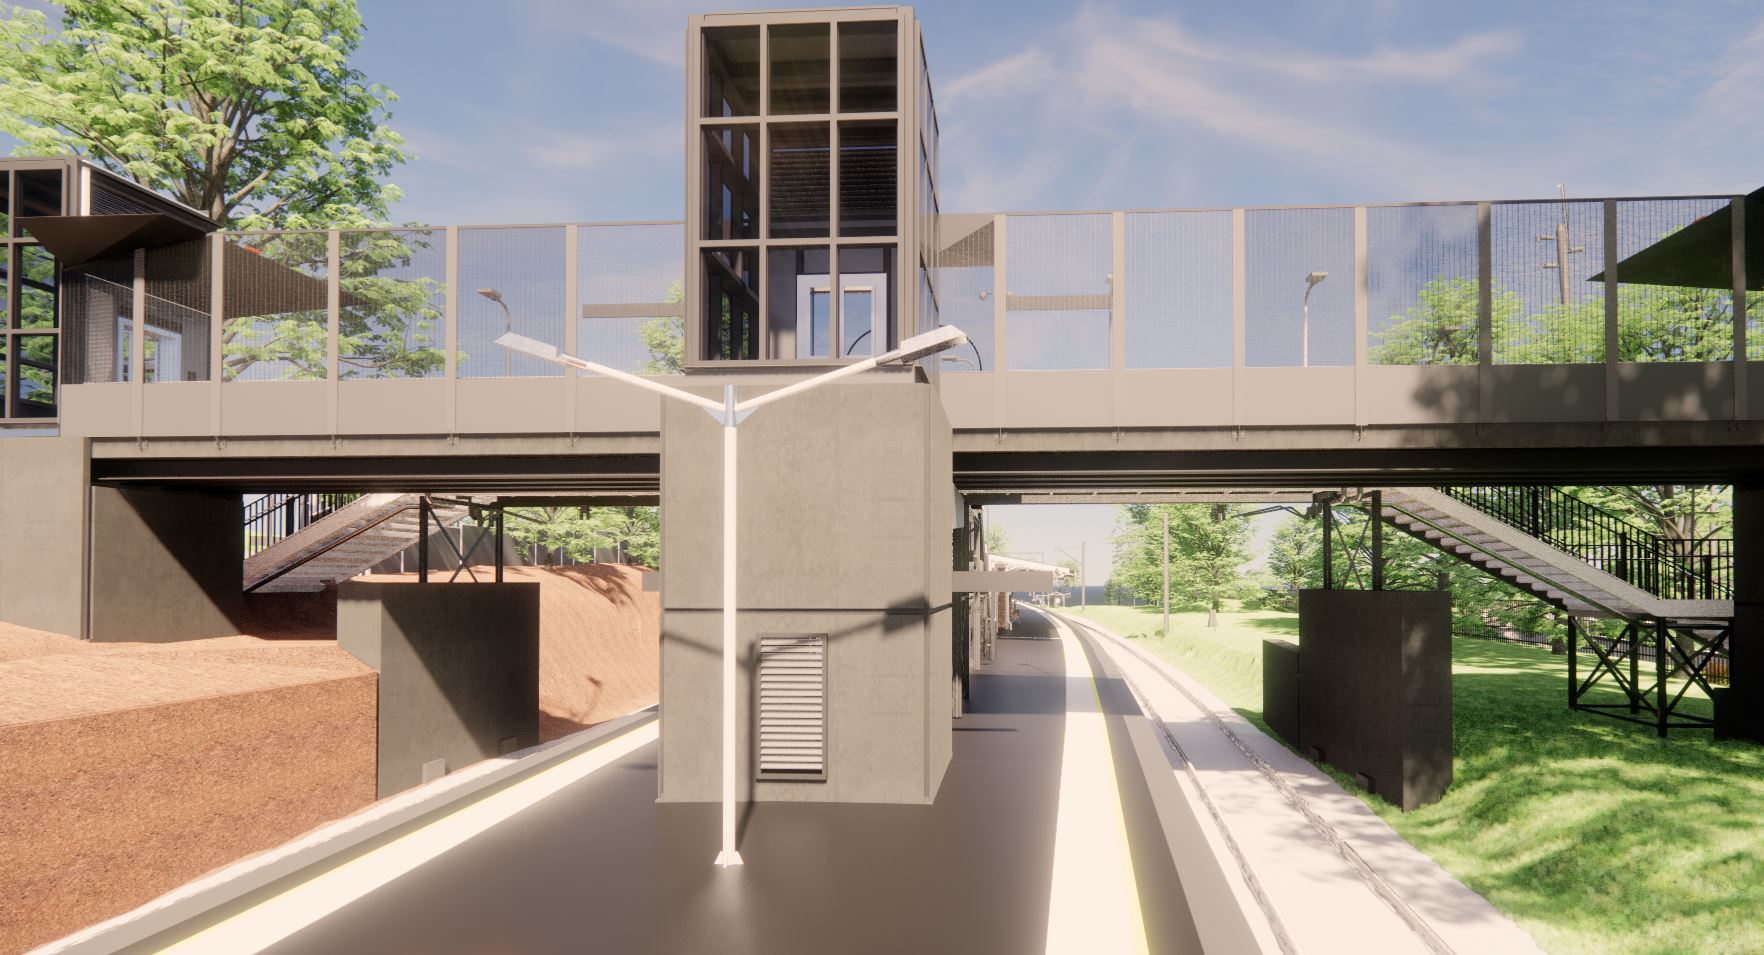 Artist’s impression of the proposed deflection walls and reduced canopy at Killara Station (subject to detailed design)